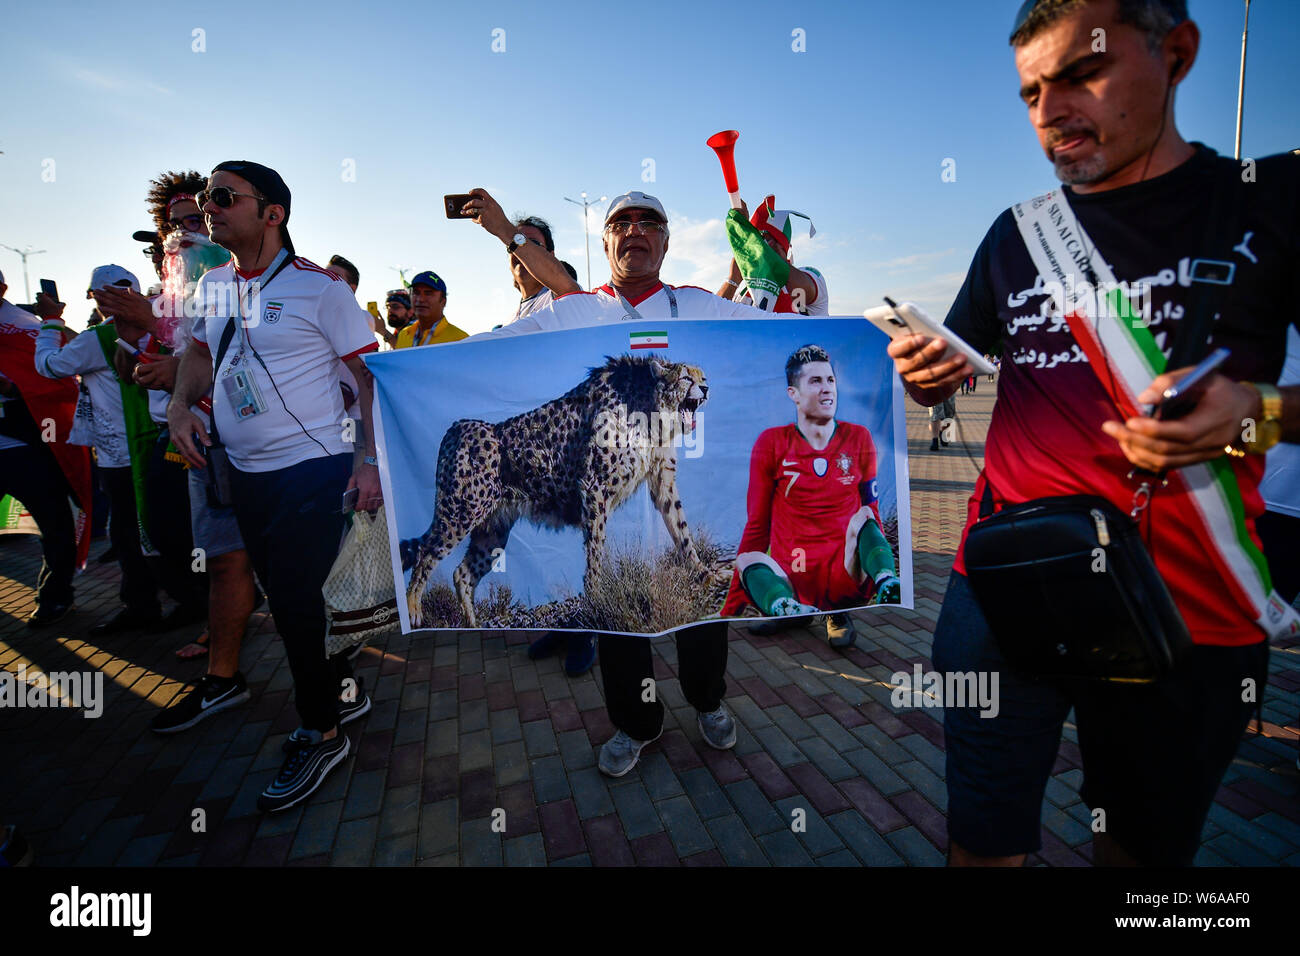 Iranian fans gather outside the Mordovia Arena Stadium before the group B match between Portugal and Iran during the FIFA World Cup 2018 in Saransk, R Stock Photo